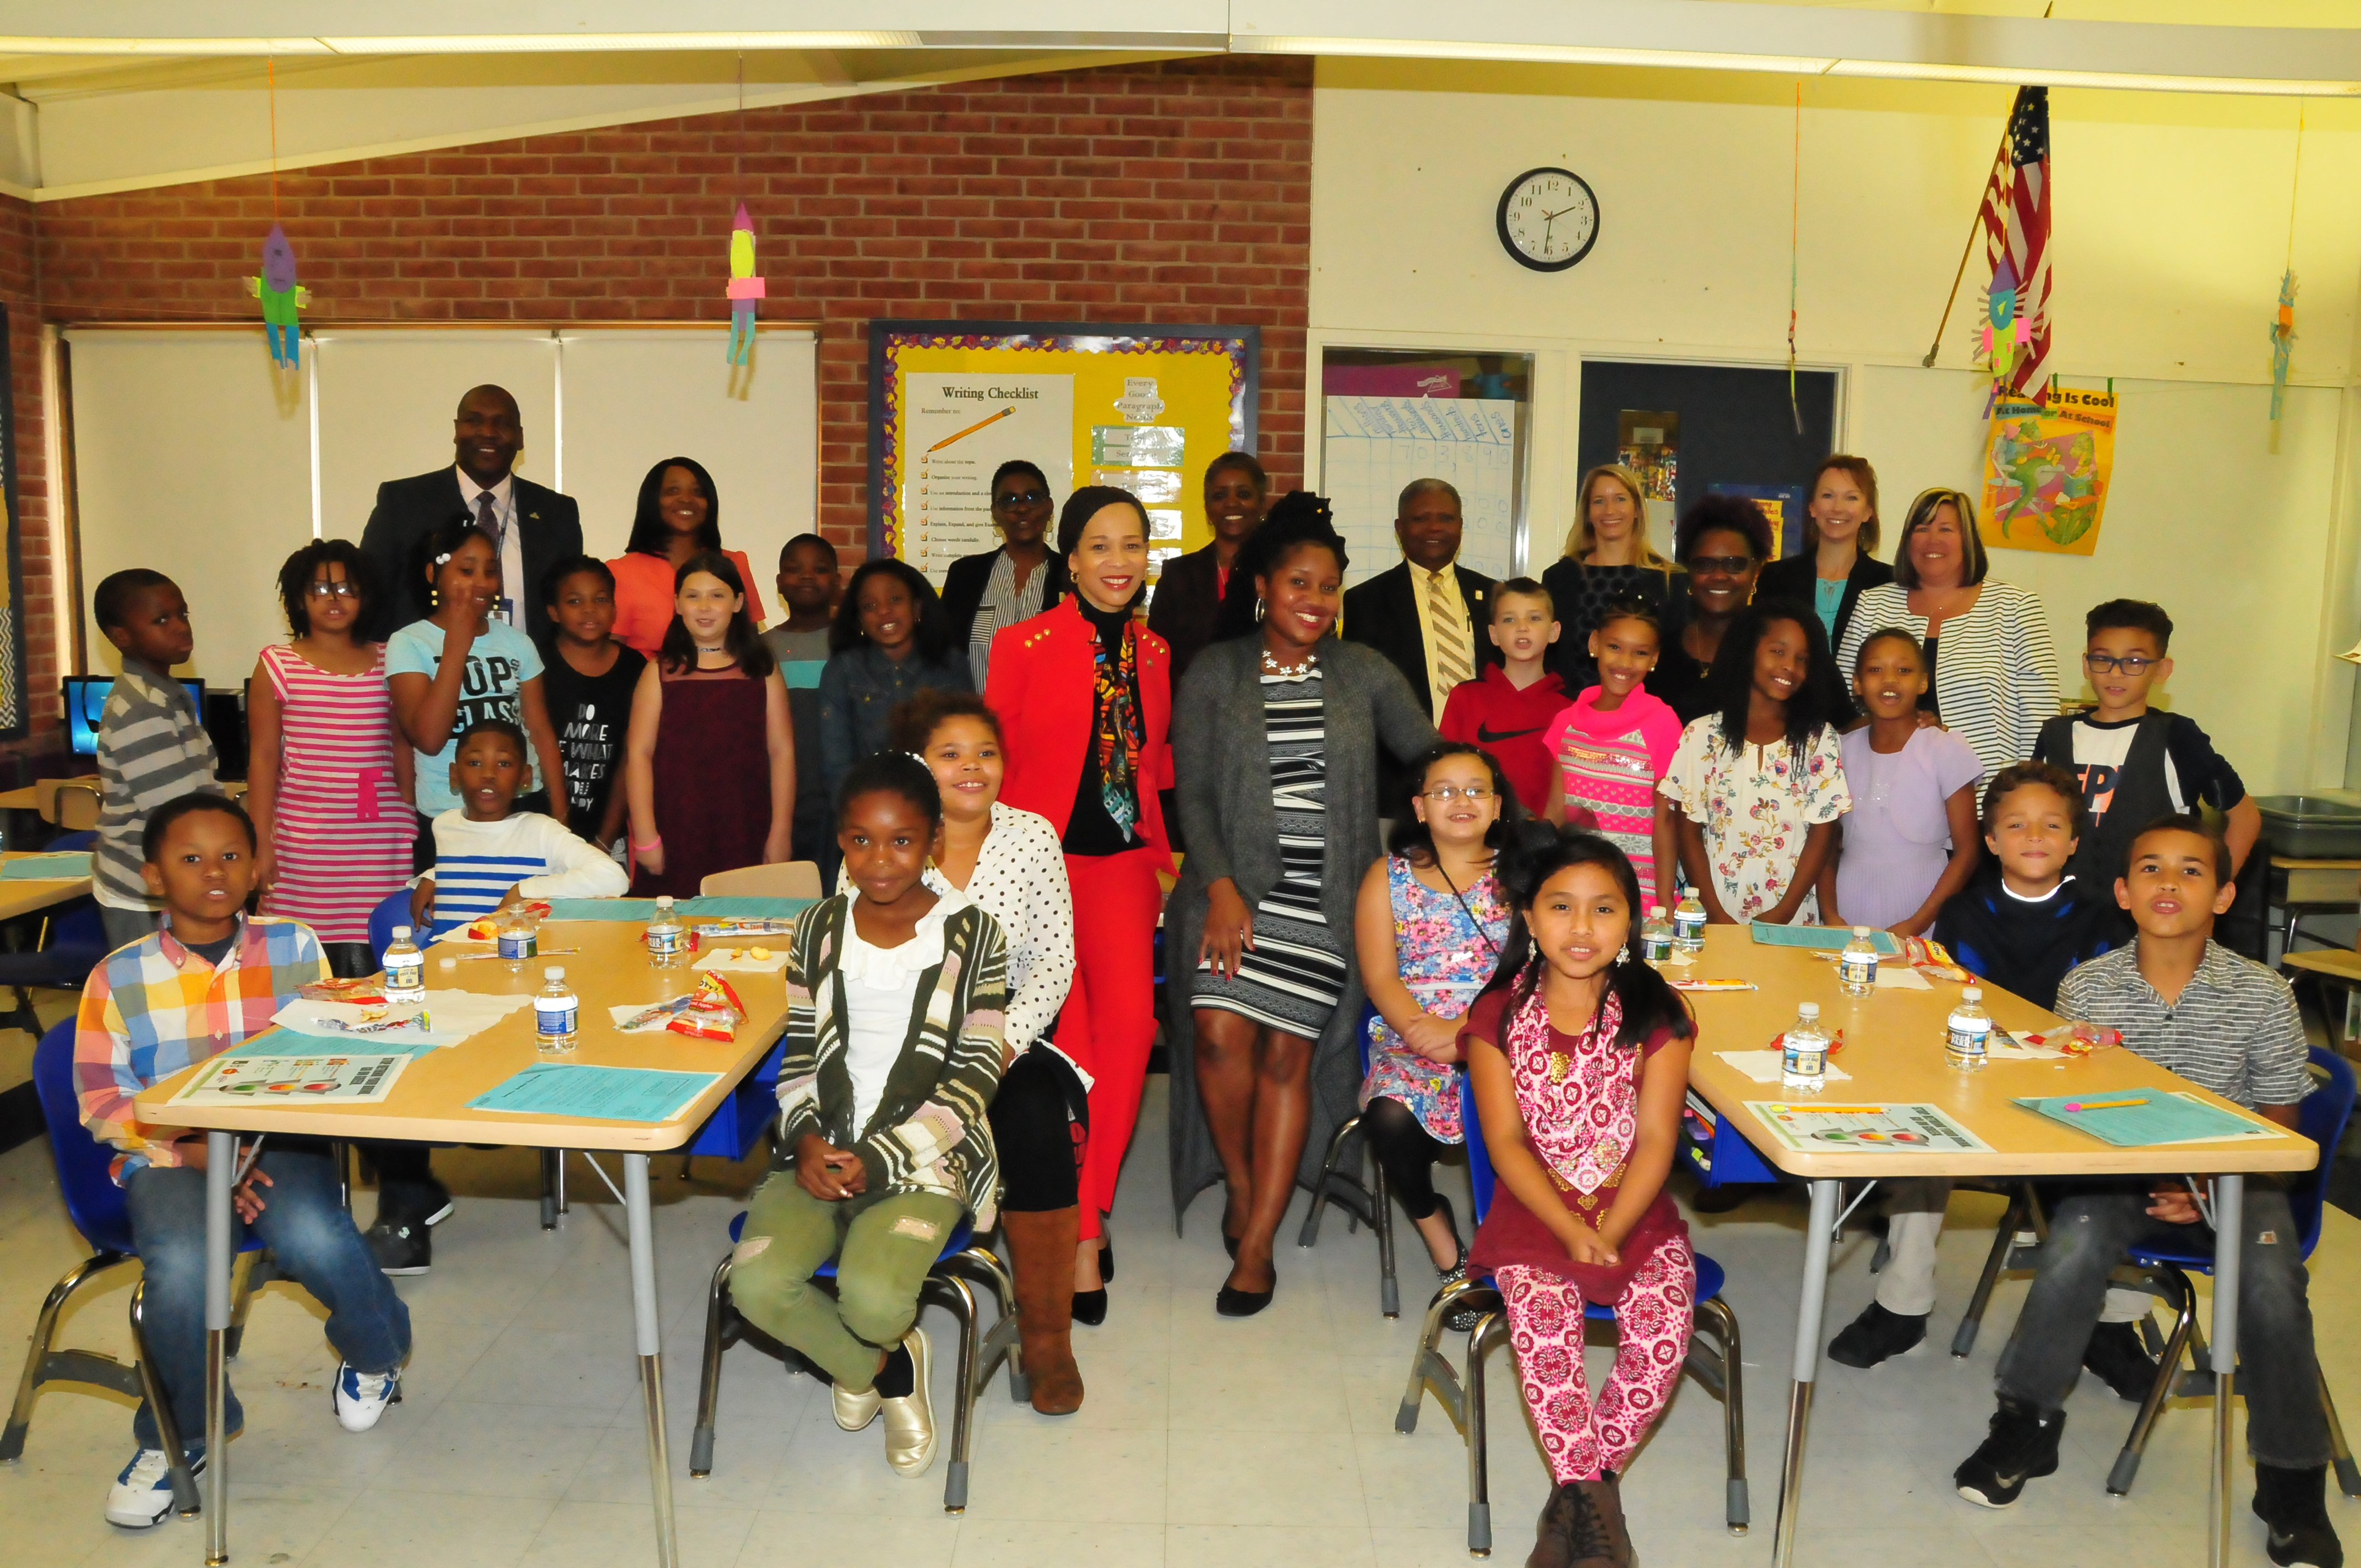 Del. Congresswoman Lisa Blunt Rochester and Ciara Martin, DSU nutrition educator (both in the center),  join students of Towne Point Elementary School and others for a photo after teaching about healthy and unhealthy drink choices.